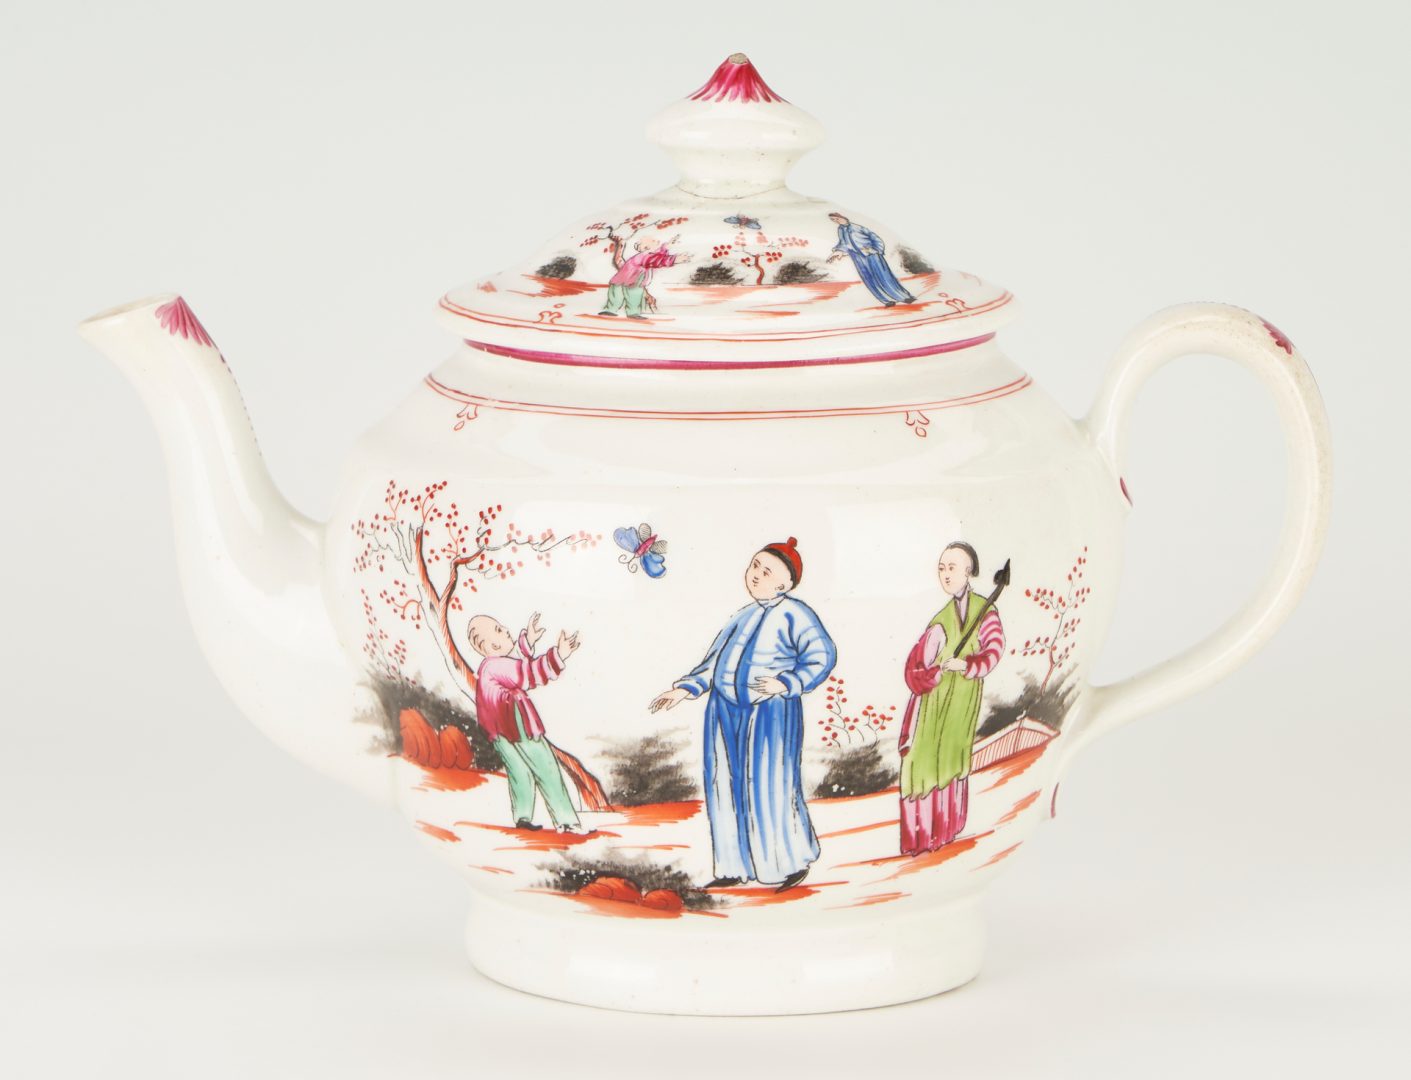 Lot 414: 32 Chinese Export and English Porcelain Tea Items